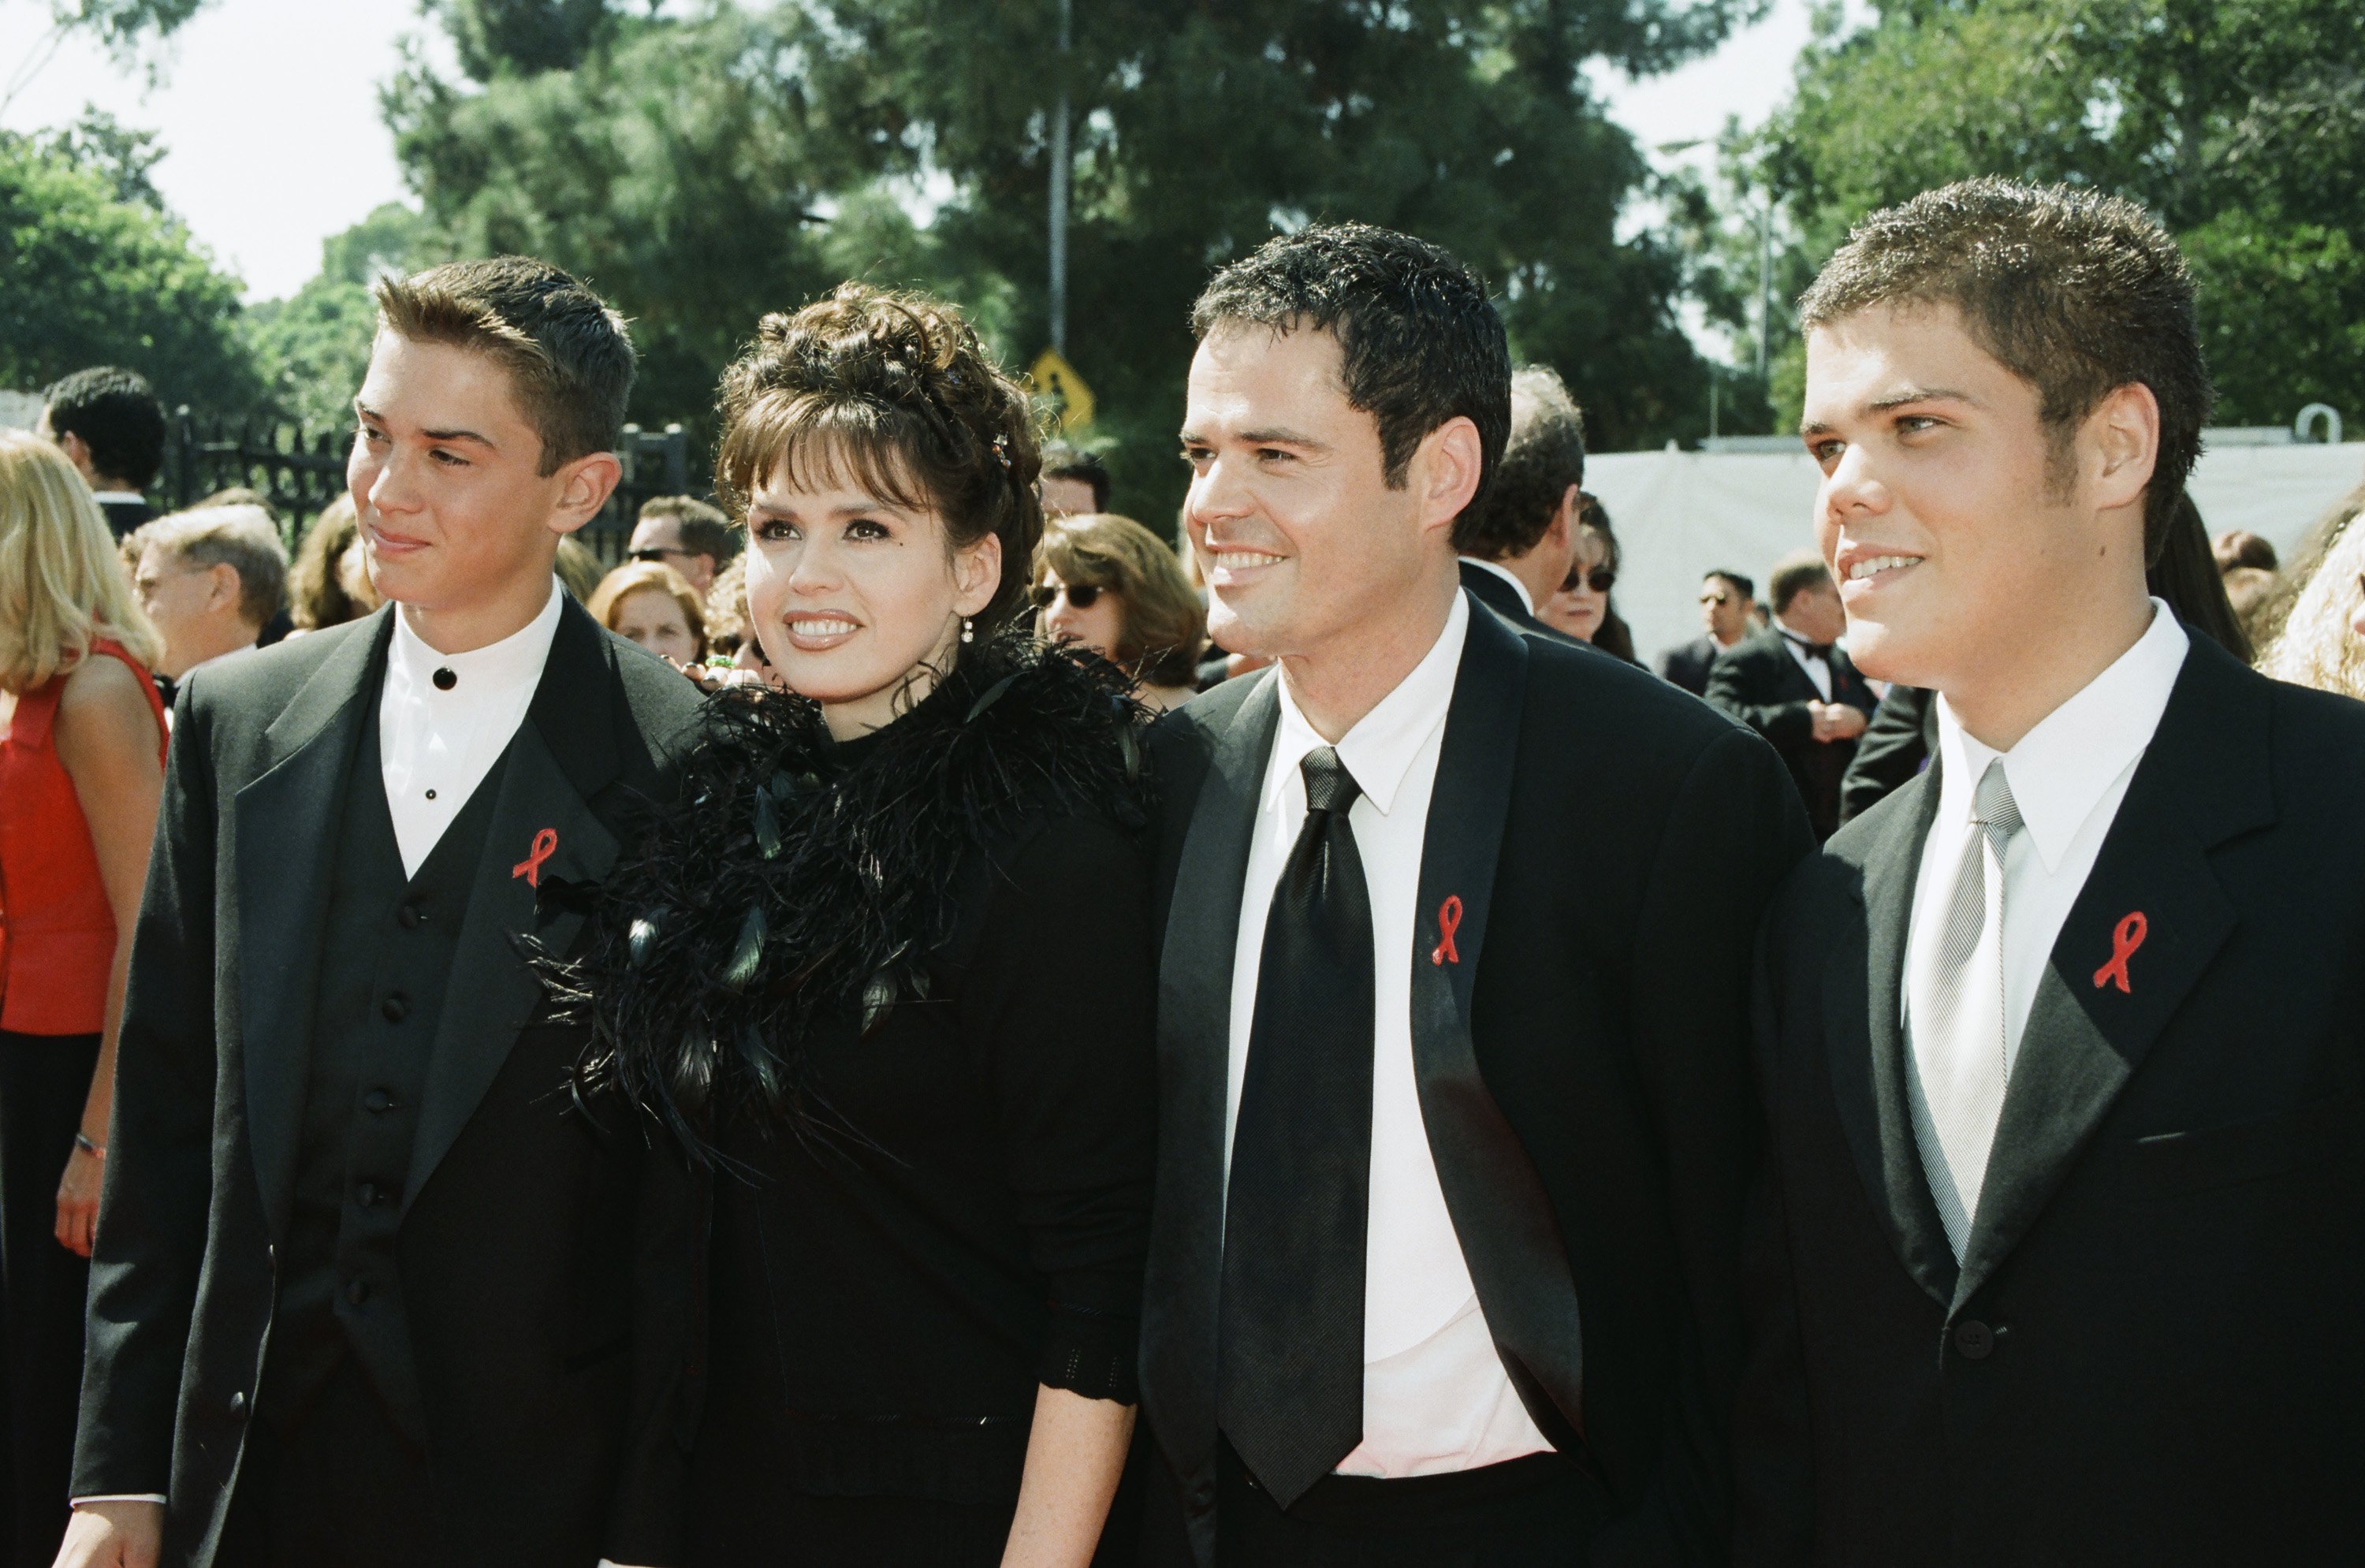 (L-R) Son Michael Blosil, Marie Osmond, Donny Osmond, son Brandon Osmond arrive at the 50th Annual Primetime Emmy Awards at the Shrine Auditorium on September 13, 1998 in Los Angeles, California ┃Source: Getty Images